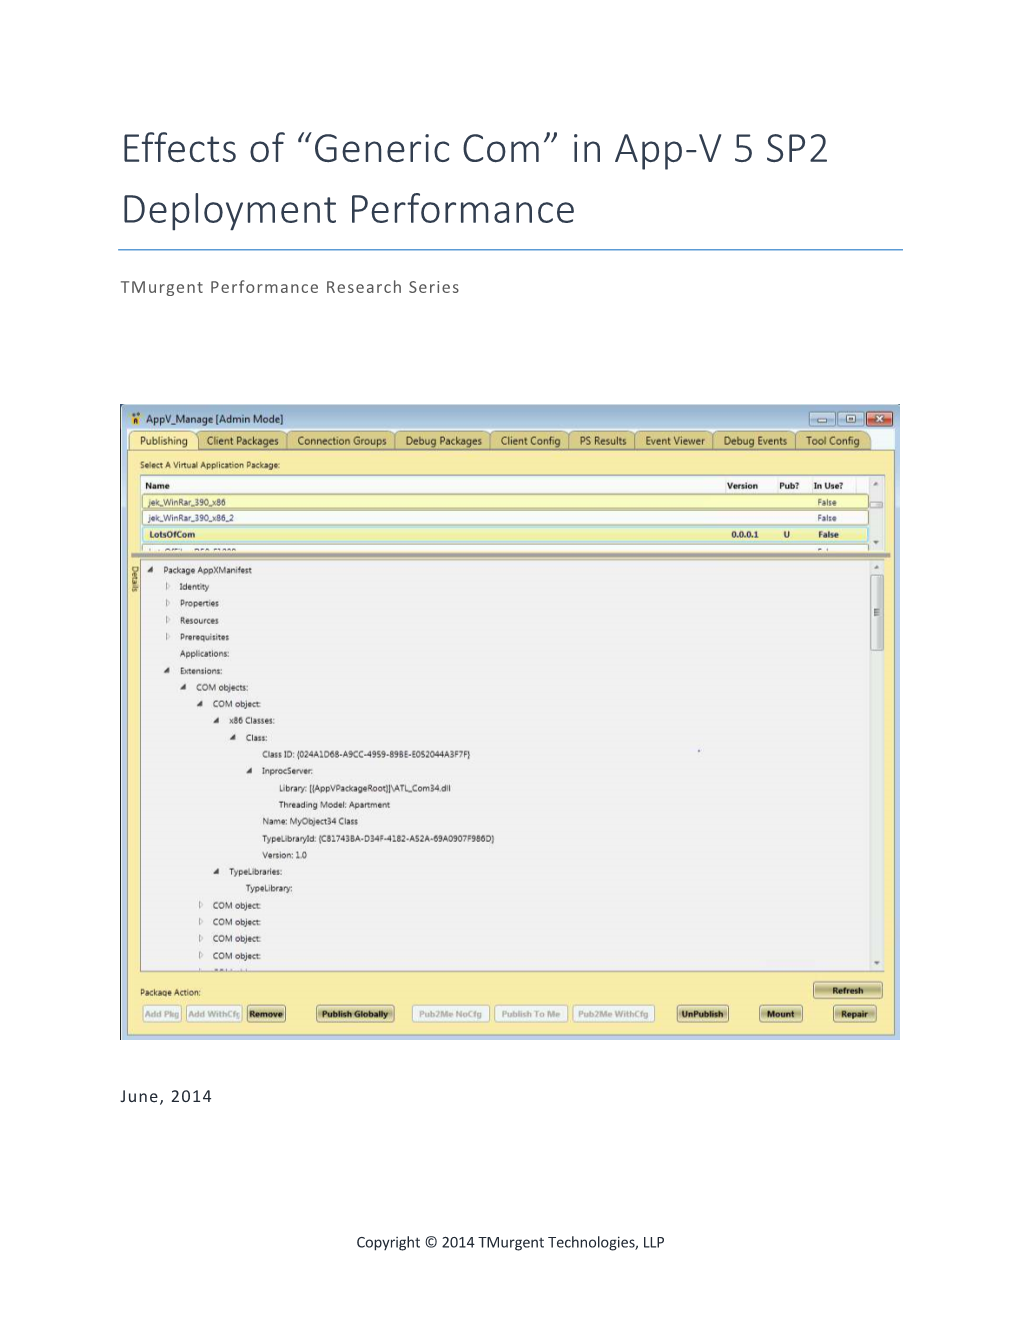 Effects of “Generic Com” in App-V 5 SP2 Deployment Performance